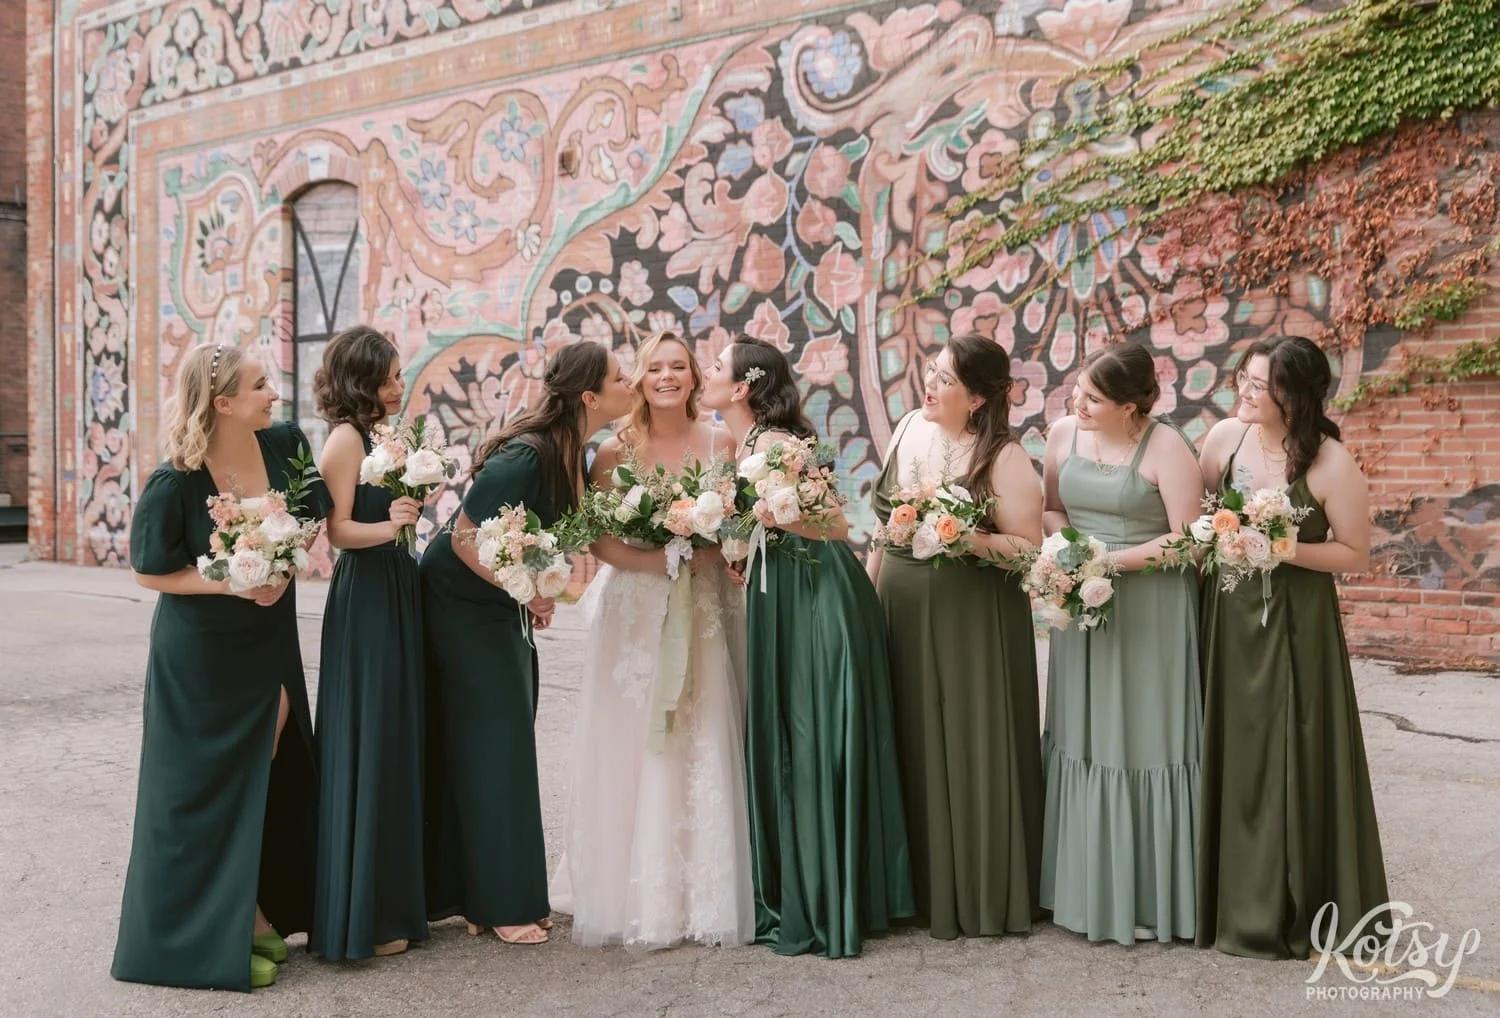 True bridesmaids holding flower bouquets mimic a kiss to a bride wearing a white bridal gown while the other bridesmaids look on outside the carpet factory in Toronto Canada in front of a colorful mural